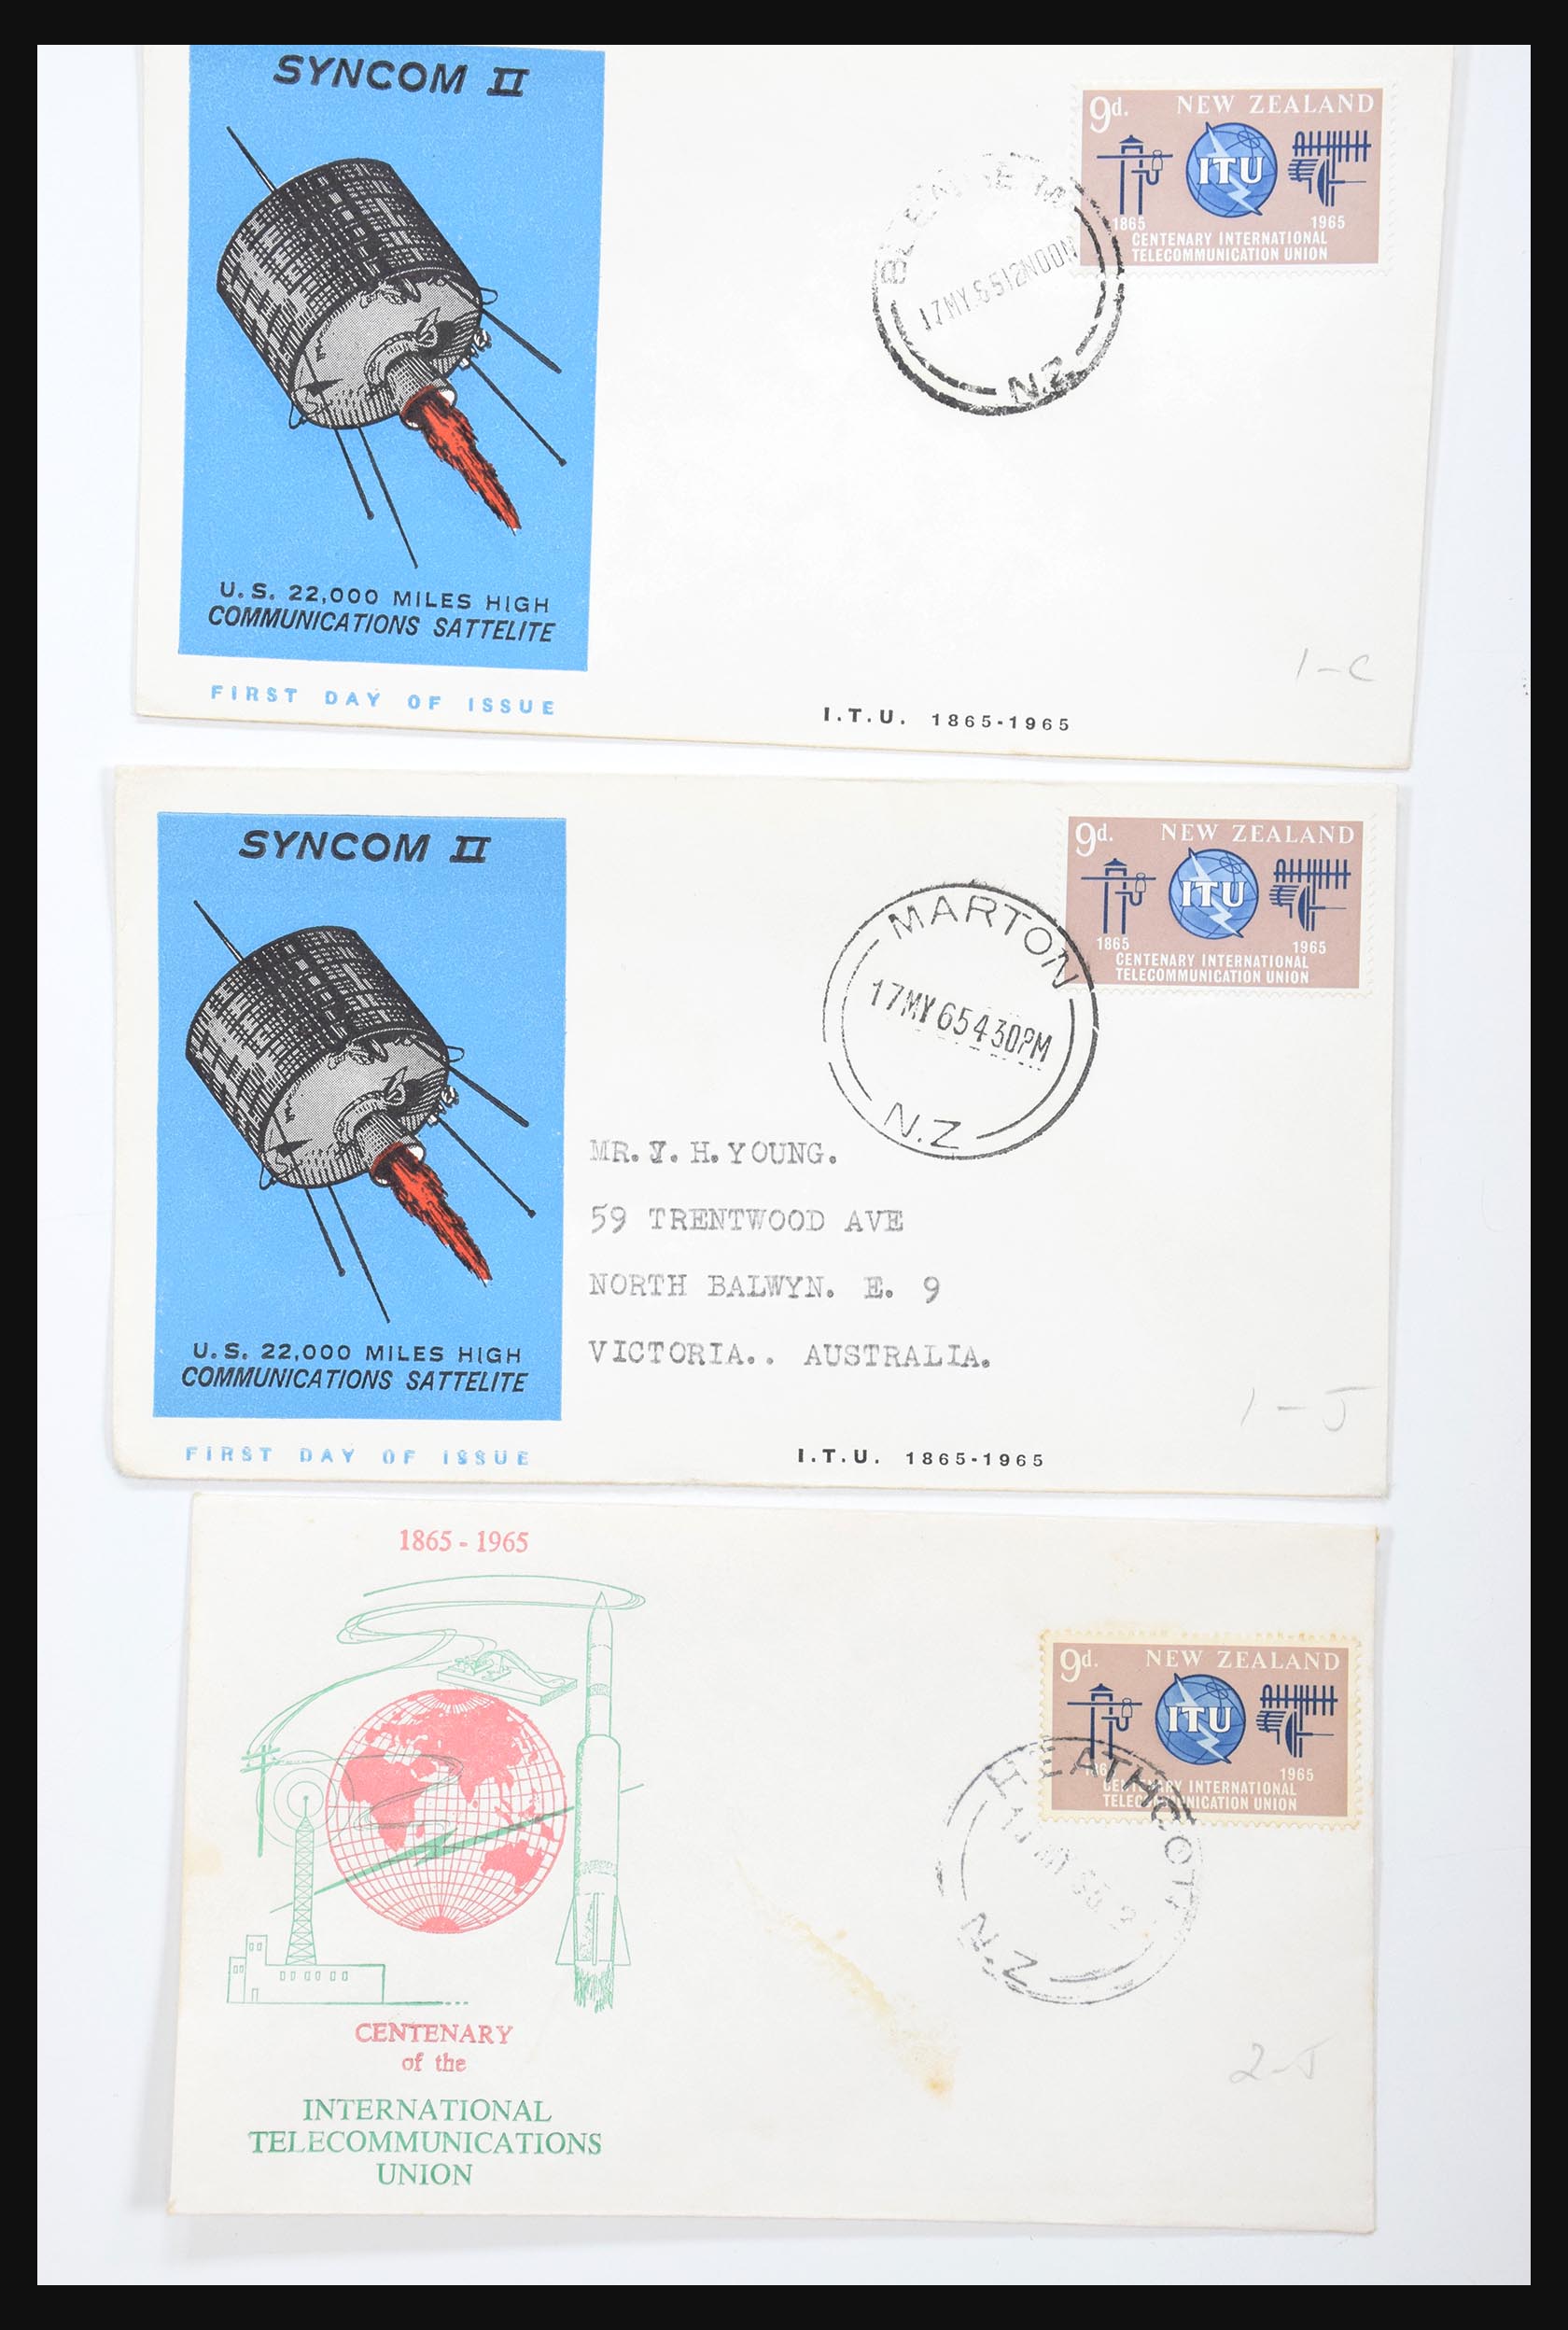 30821 076 - 30821 New Zealand FDC's 1960-1971.